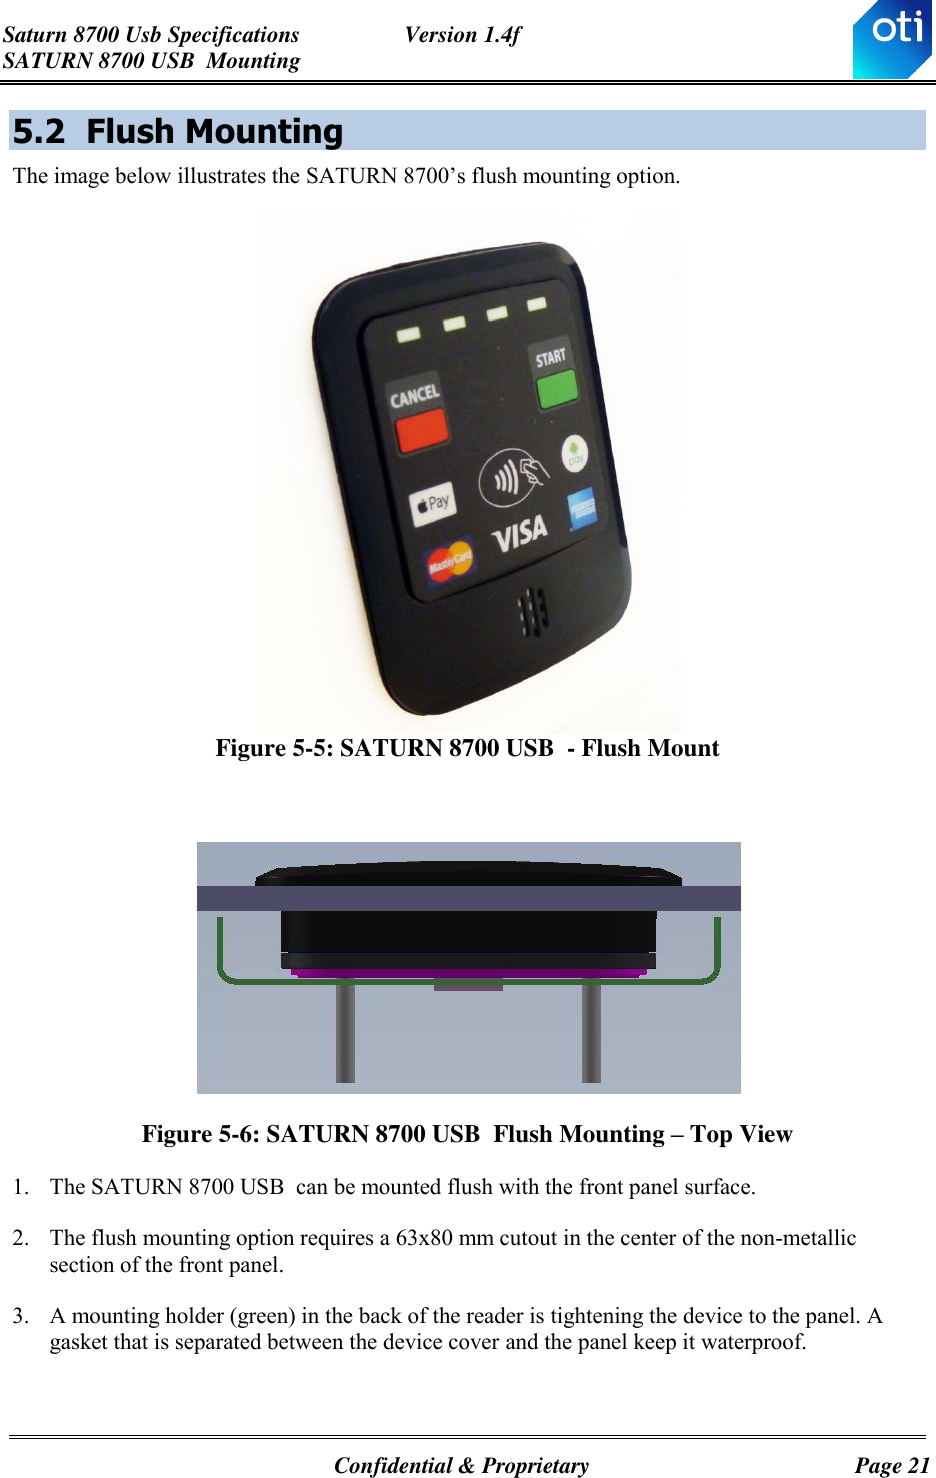 Saturn 8700 Usb Specifications  Version 1.4f SATURN 8700 USB  Mounting   Confidential &amp; Proprietary  Page 21 5.2 Flush Mounting The image below illustrates the SATURN 8700’s flush mounting option.  Figure 5-5: SATURN 8700 USB  - Flush Mount   Figure 5-6: SATURN 8700 USB  Flush Mounting – Top View 1. The SATURN 8700 USB  can be mounted flush with the front panel surface. 2. The flush mounting option requires a 63x80 mm cutout in the center of the non-metallic section of the front panel. 3. A mounting holder (green) in the back of the reader is tightening the device to the panel. A gasket that is separated between the device cover and the panel keep it waterproof.   